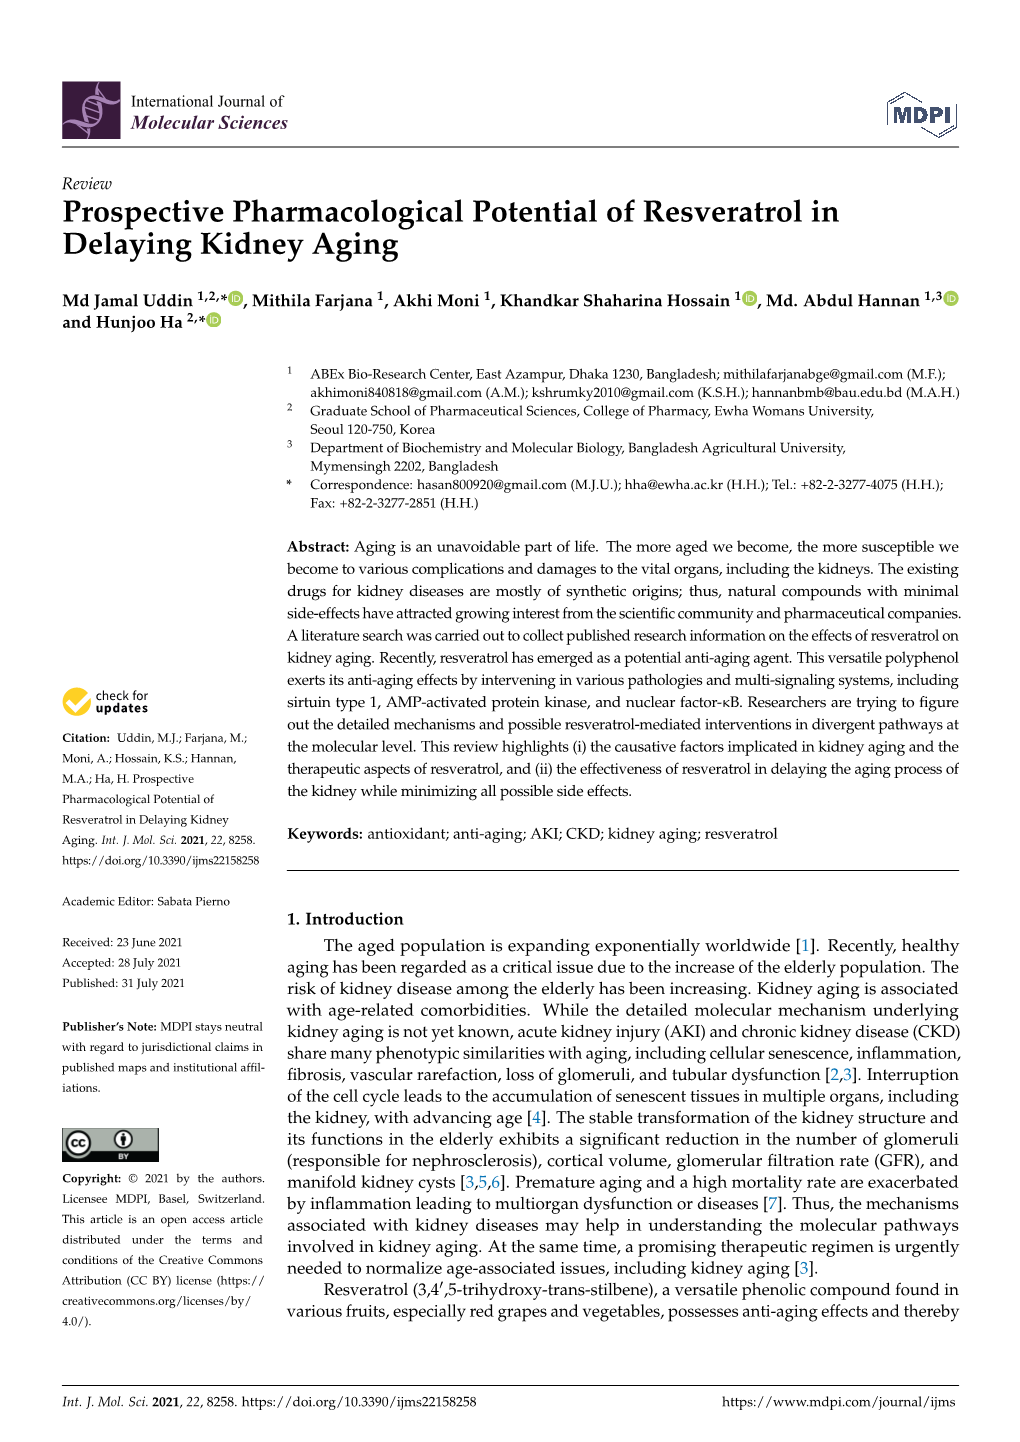 Prospective Pharmacological Potential of Resveratrol in Delaying Kidney Aging